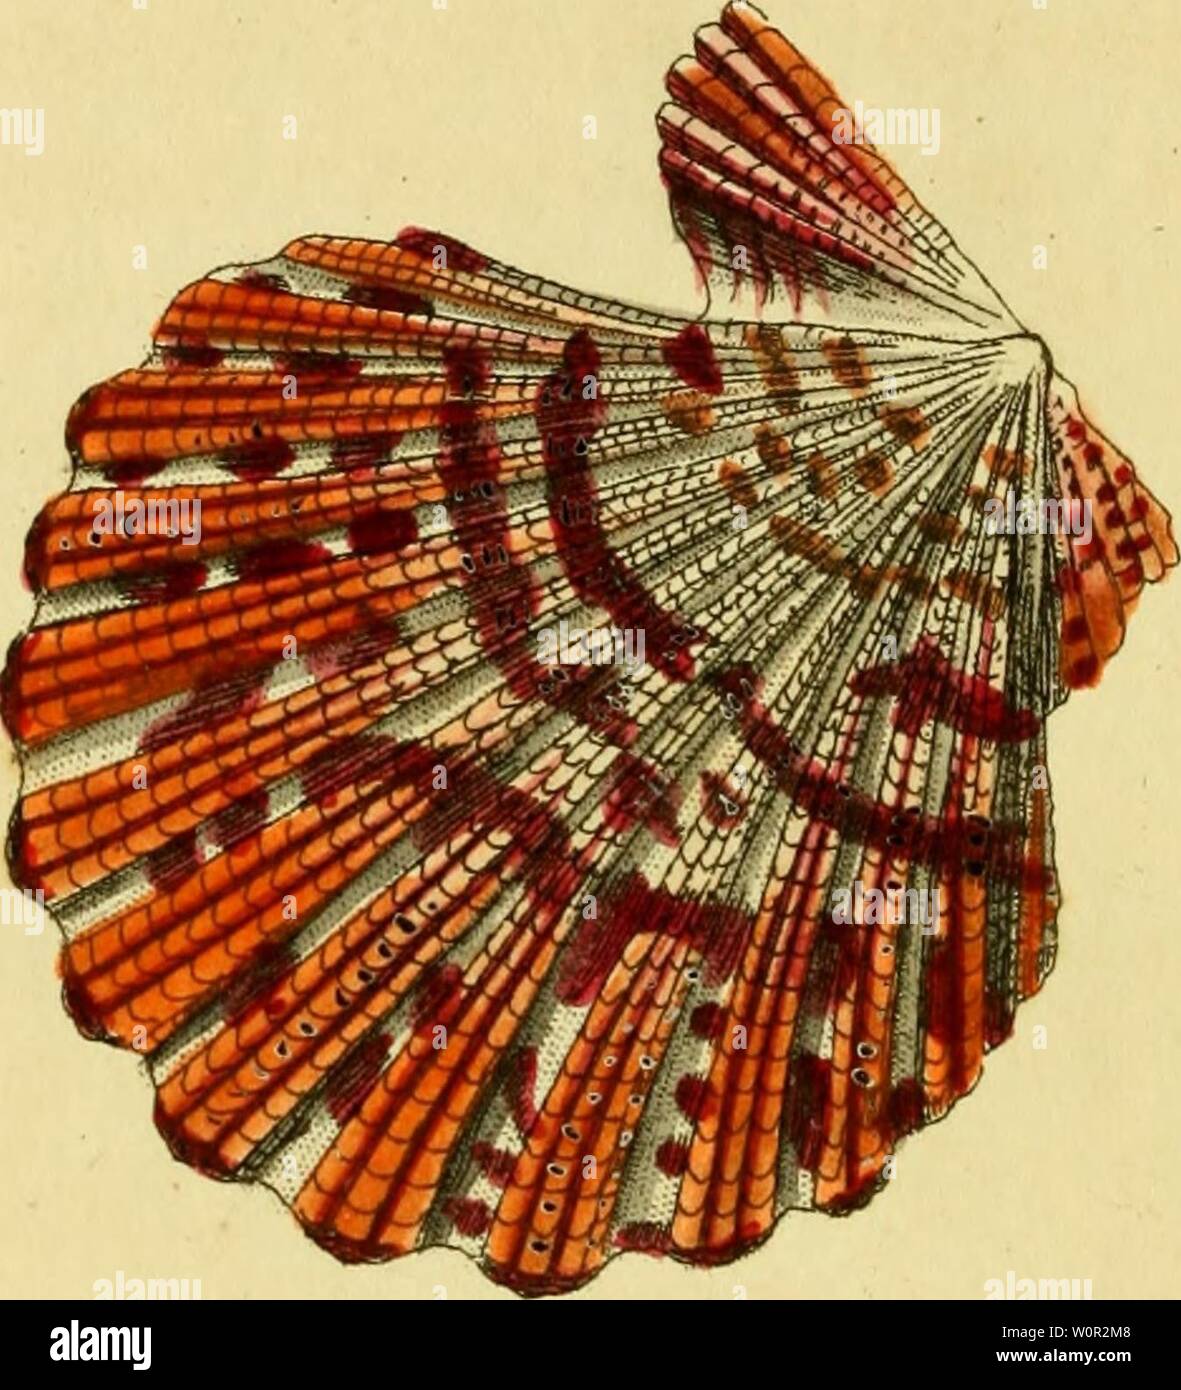 Archive image from page 213 of [Descriptions and illustrations of mollusks. [Descriptions and illustrations of mollusks : excerpted from The naturalist's miscellany descriptionsillu12shaw Year: 1800  451 Stock Photo